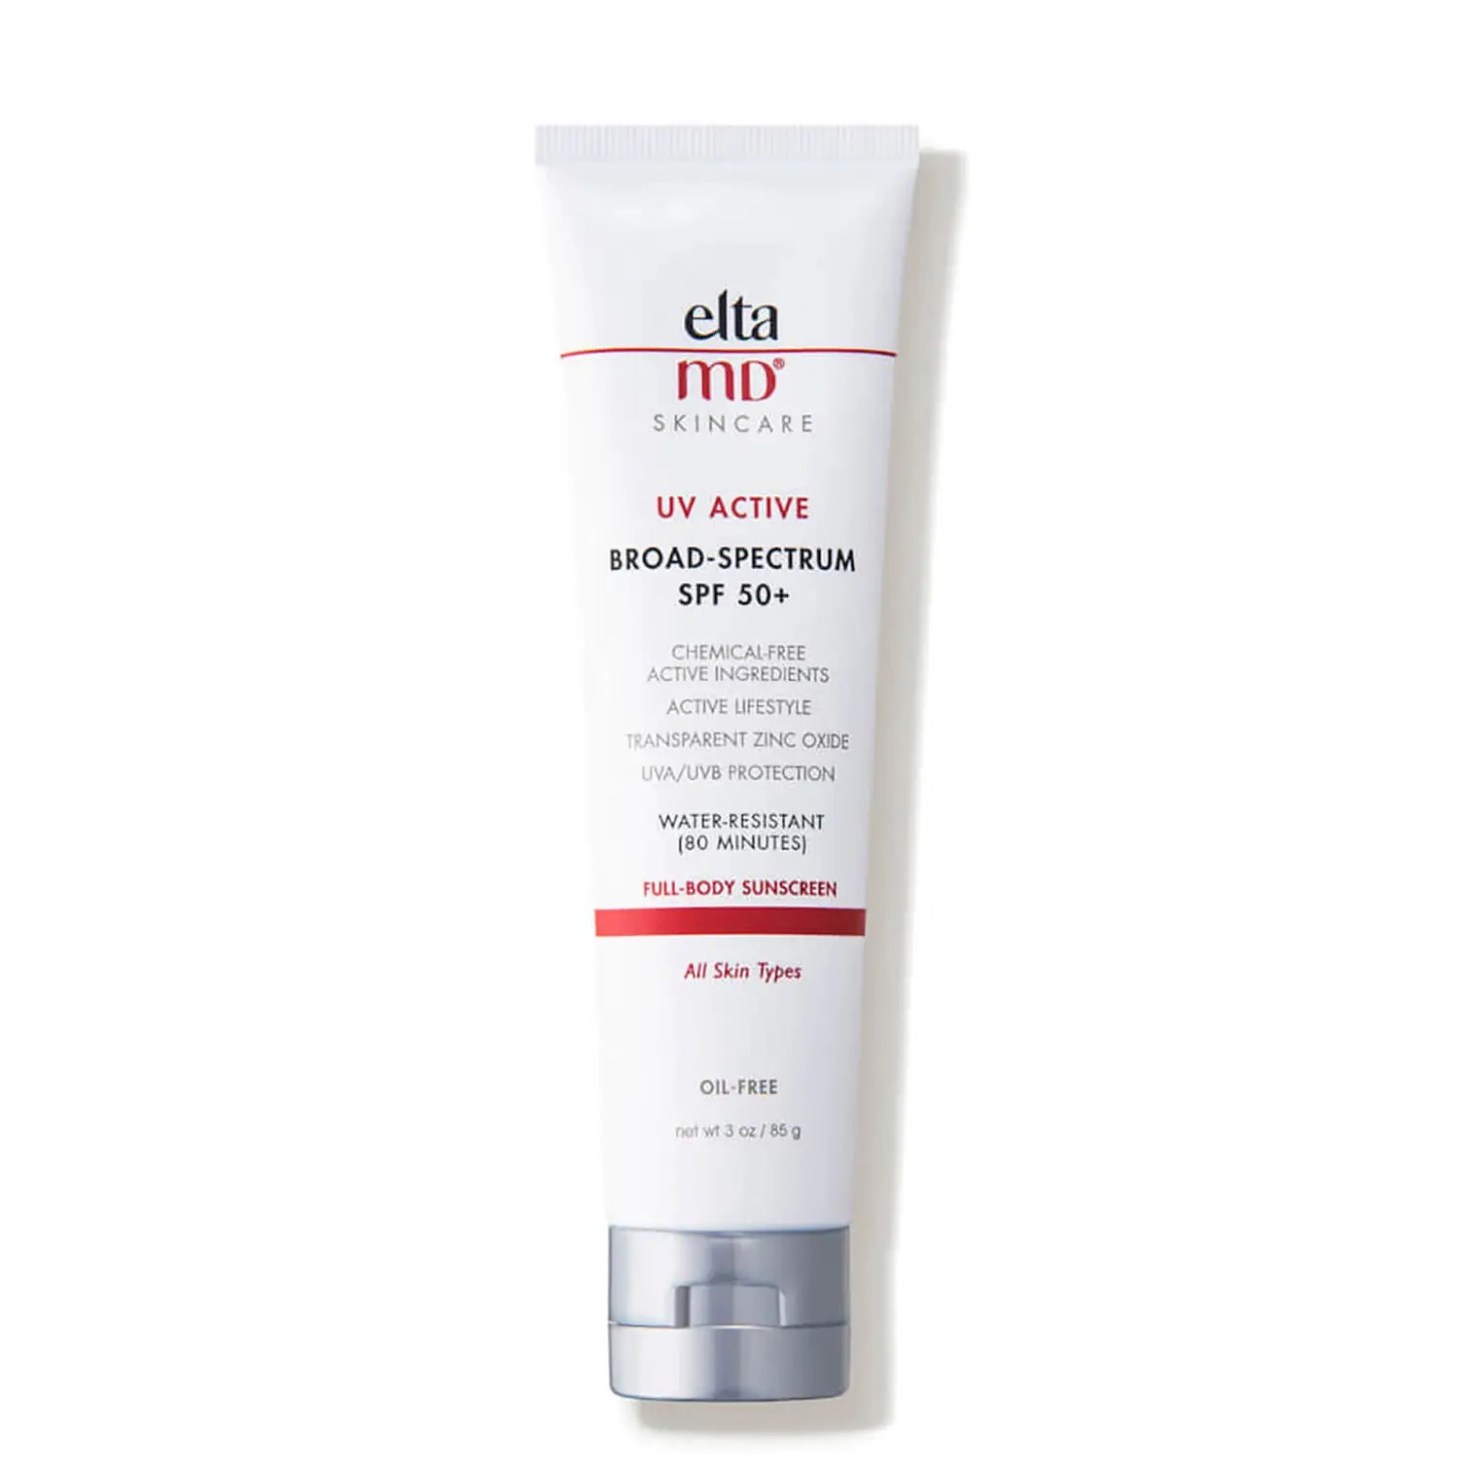 A tube of Elta MD UV active broad spectrum SPF 50